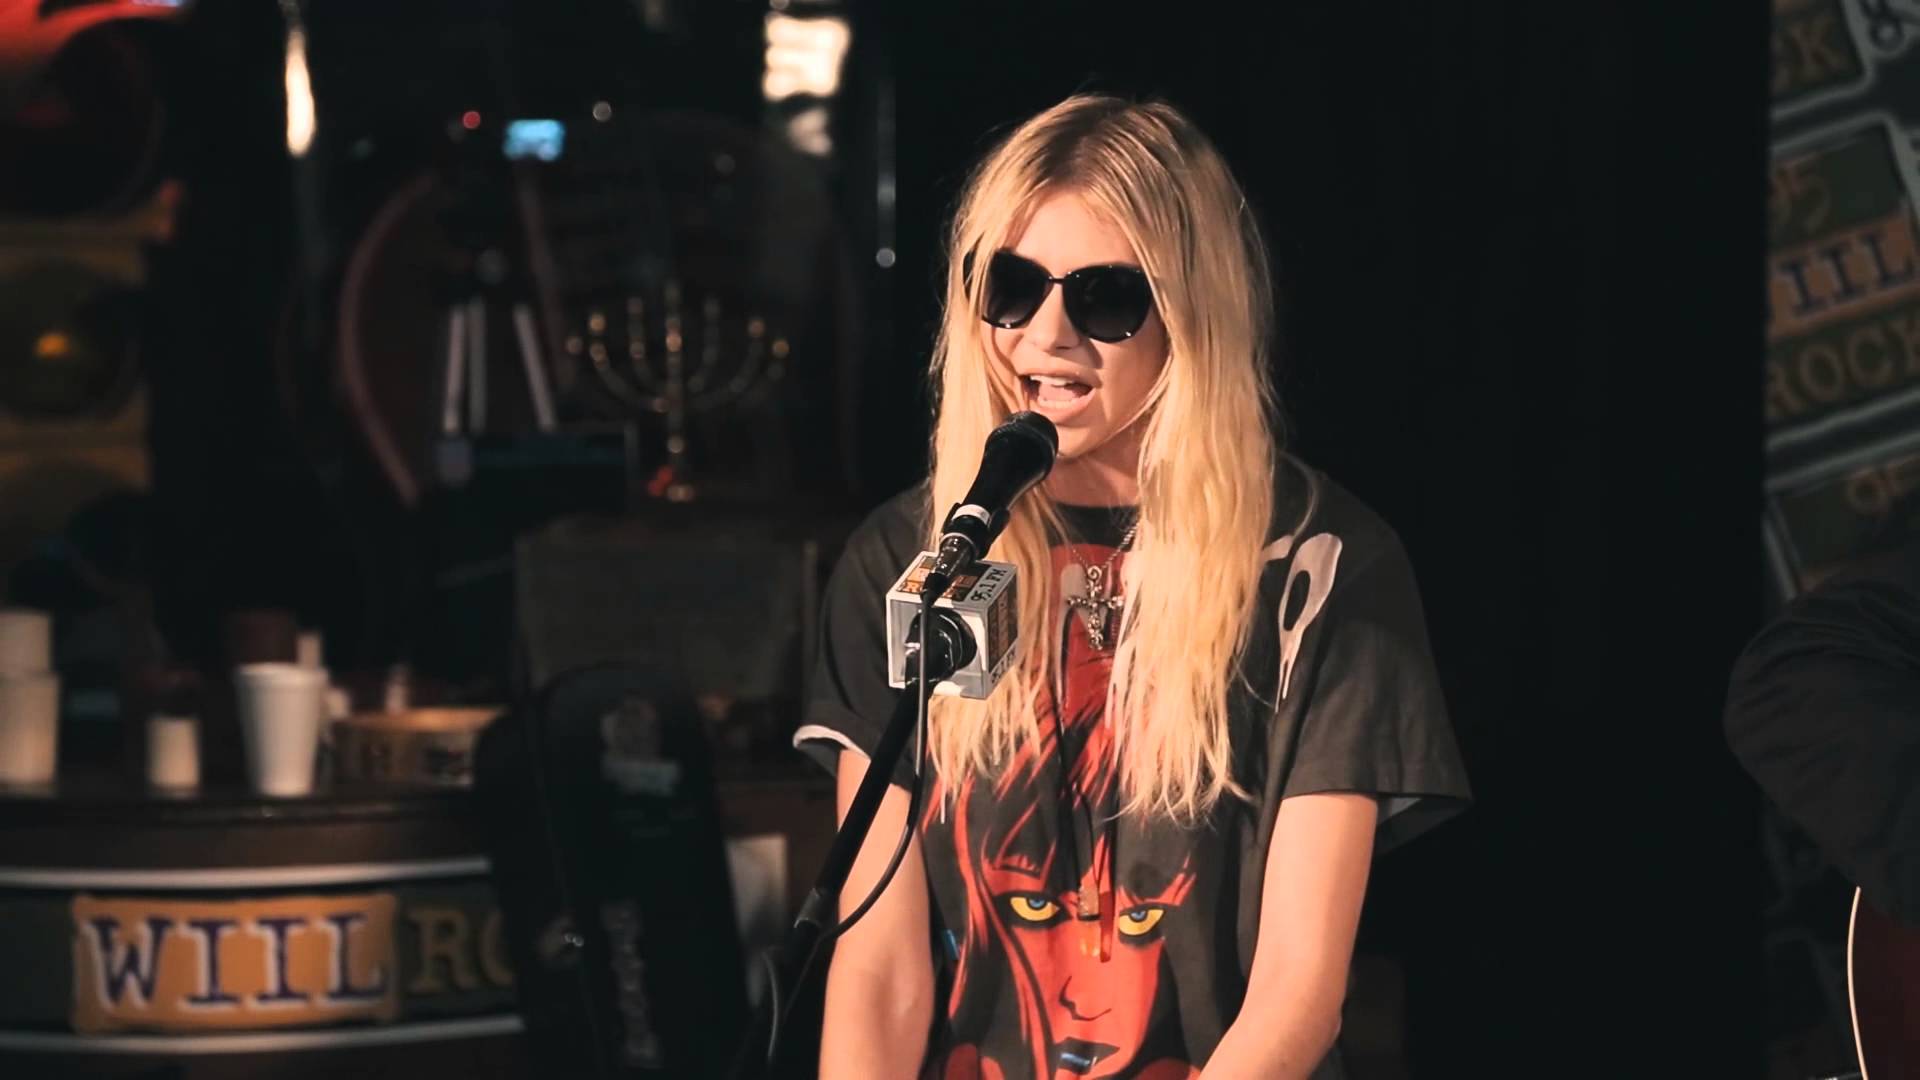 The Pretty Reckless Me Wanna Die & Going to Hell acoustic